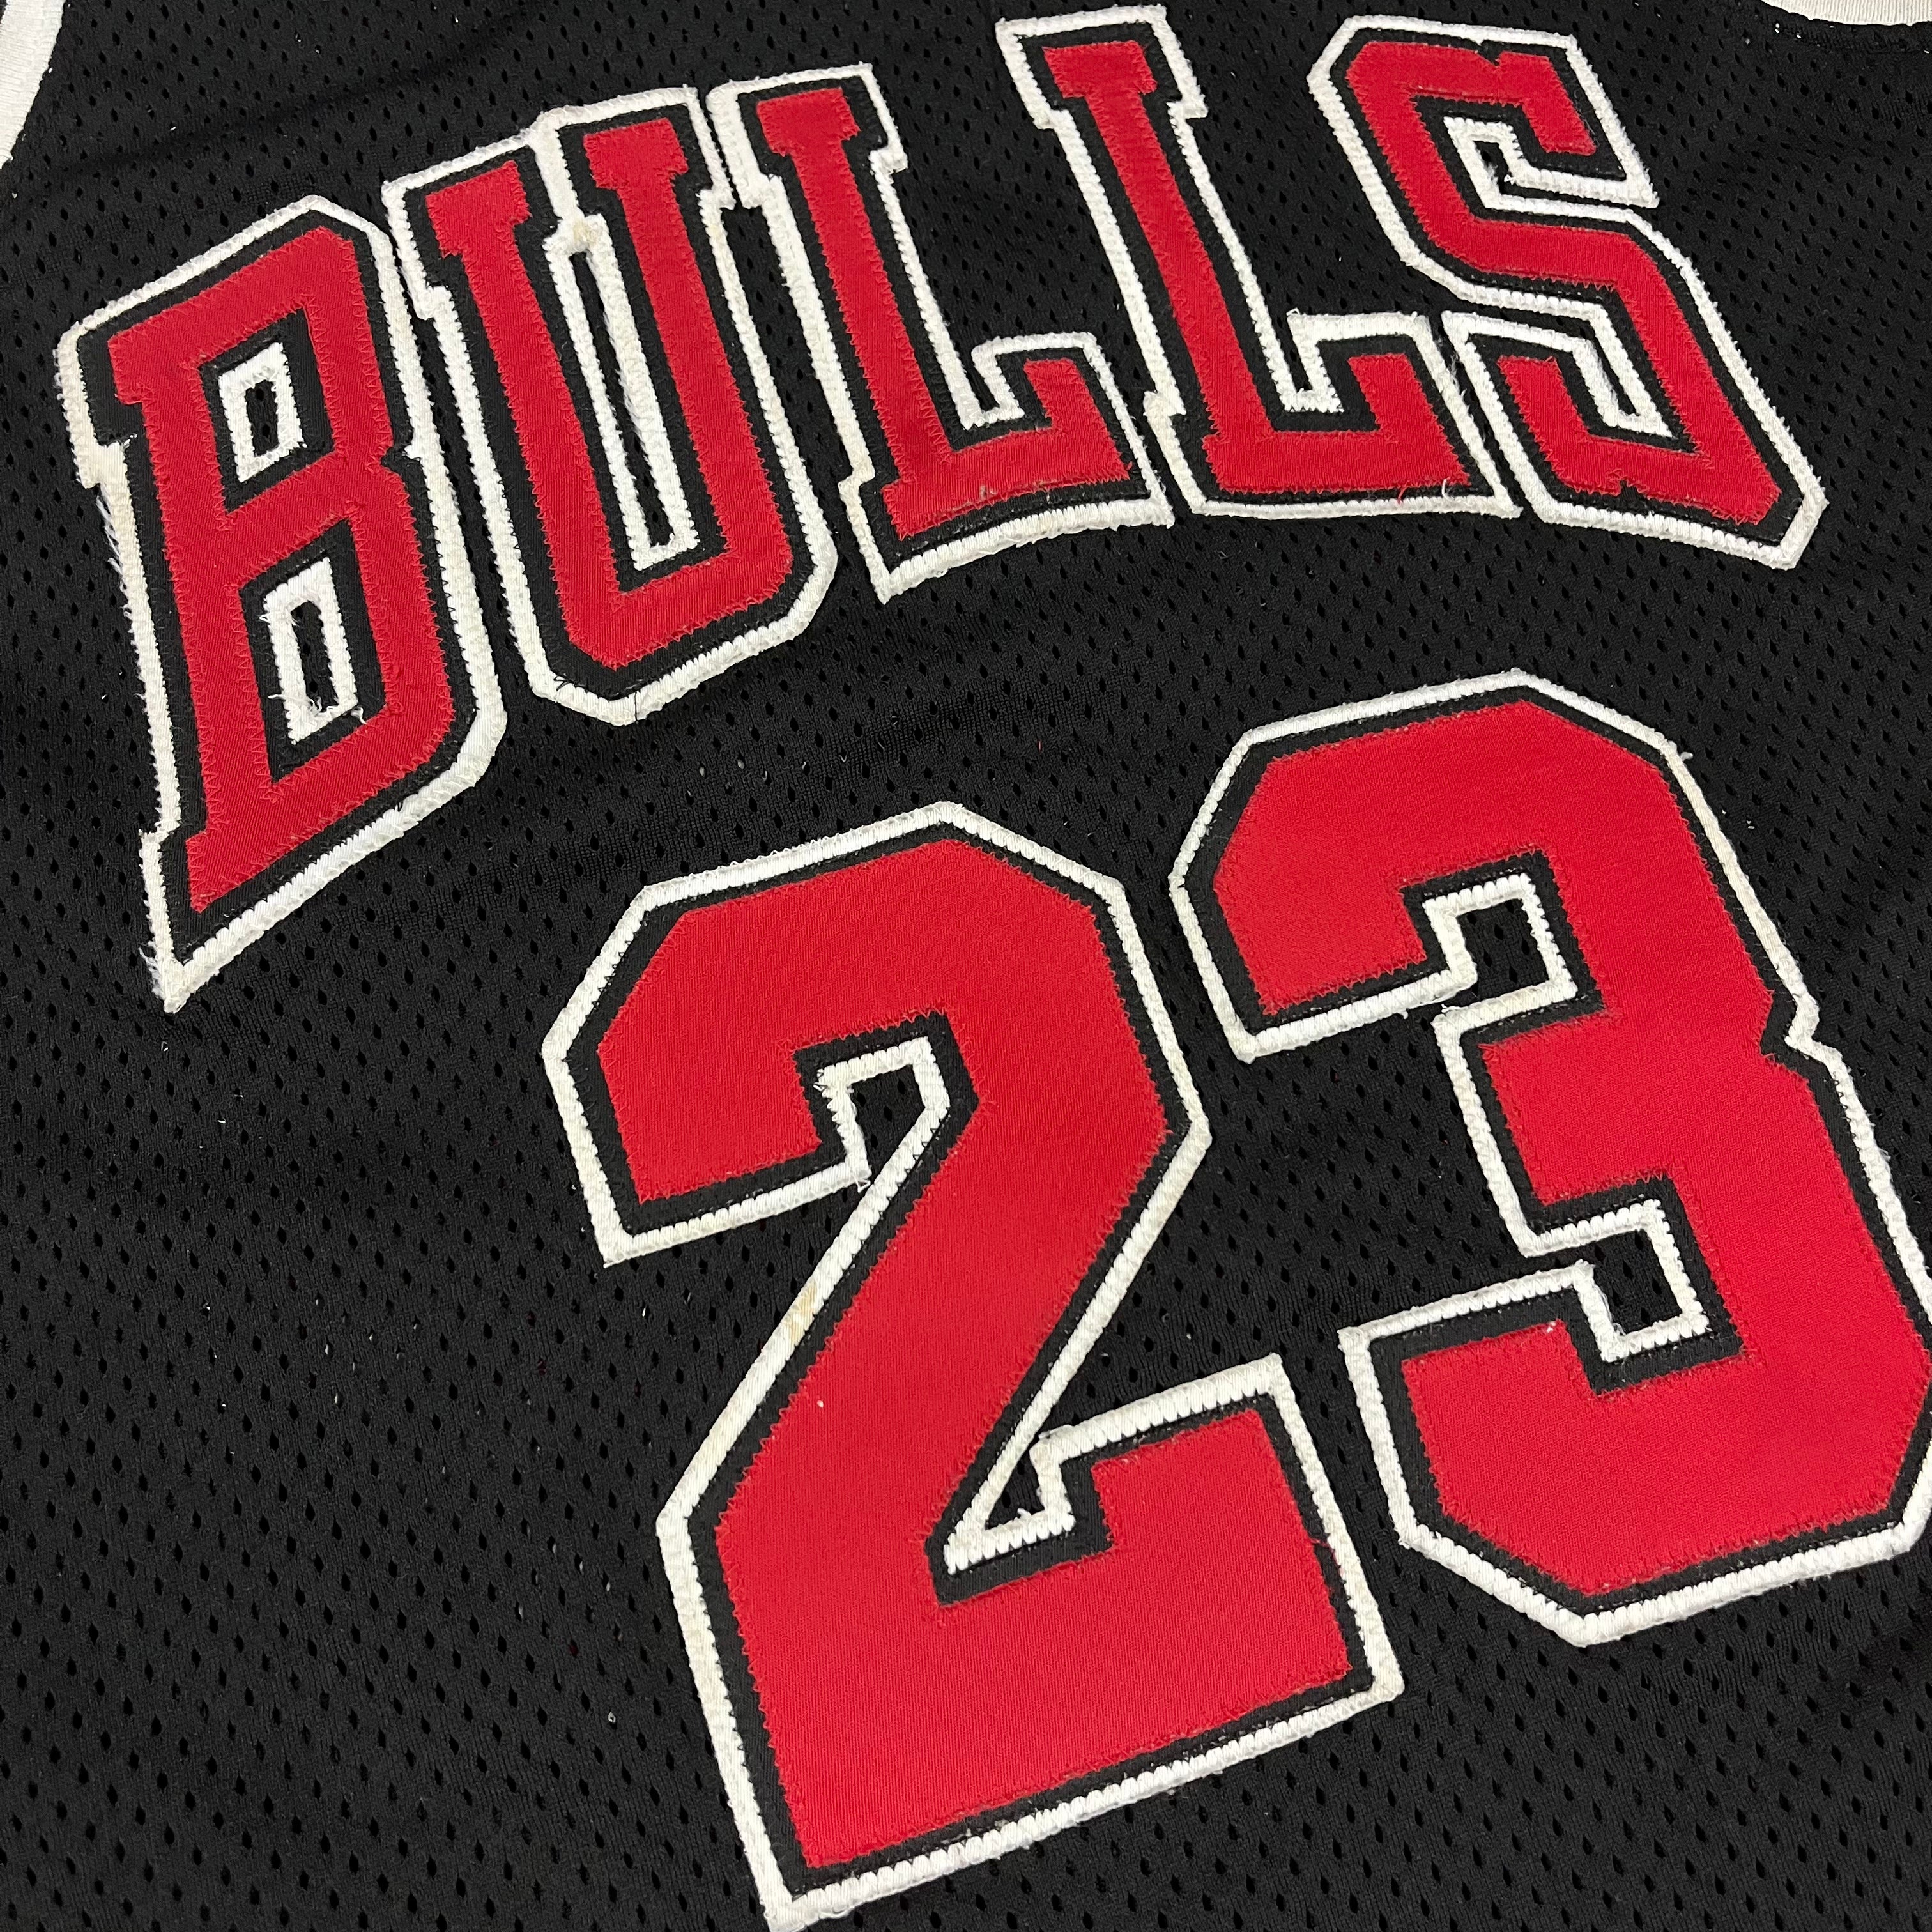 Nike Authentic MICHAEL JORDAN #23 Chicago Bulls White Jersey New With Tags.